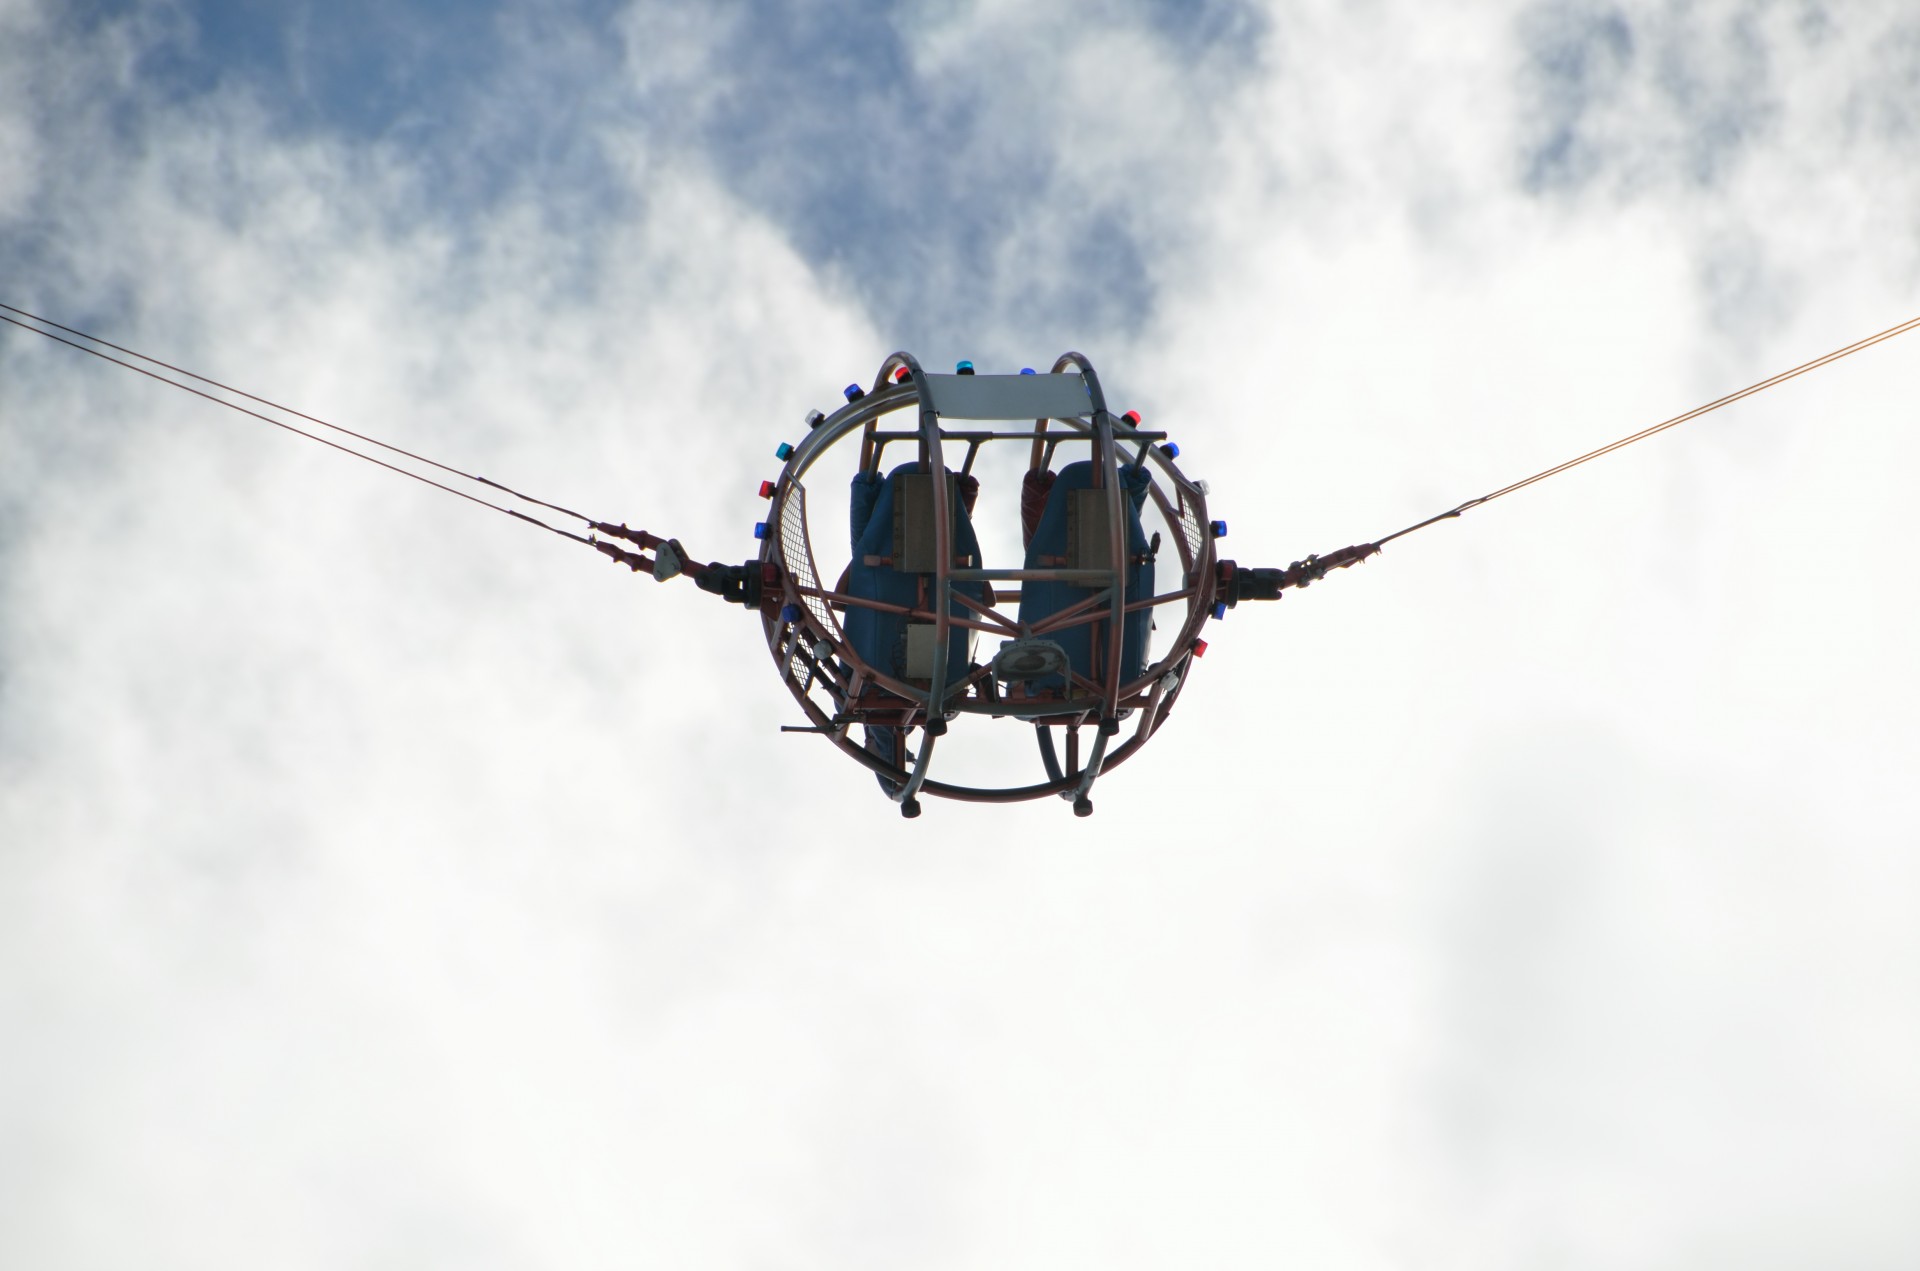 Dual Bungee ride at carnival